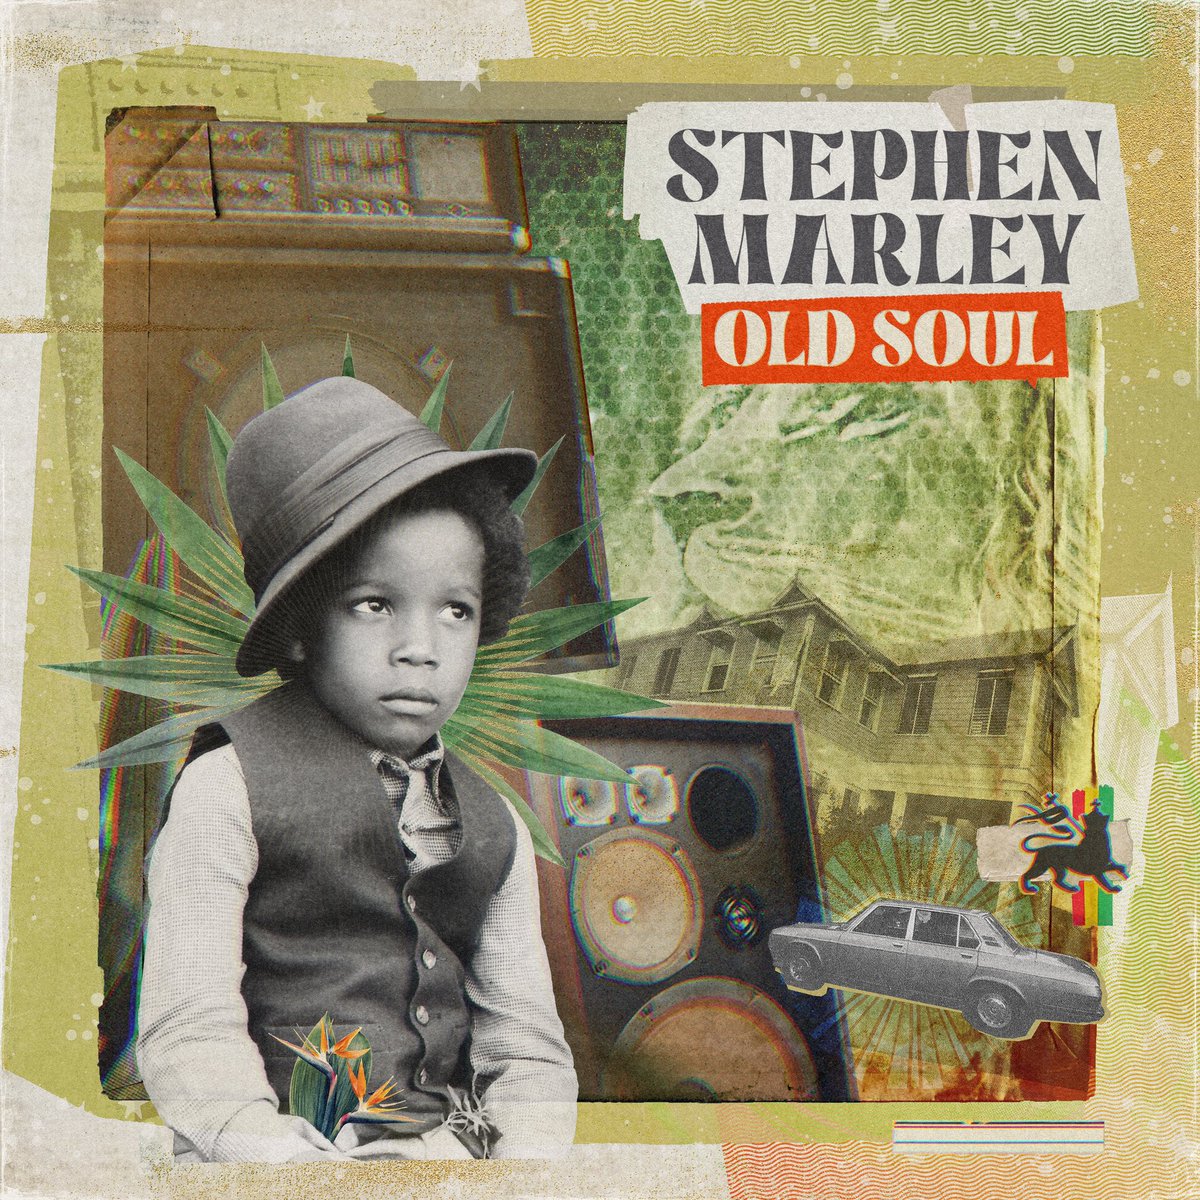 Blessed to introduce a brand new acoustic-inspired album out Sept 15th. #OldSoul now available for pre-order on Vinyl, CD, & Digital with featured appearances by @ziggymarley @damianmarley @ericclapton @bobweir @bujubanton @jackjohnson @slightlystoopid 🙏🏾 stephenmarleymusic.com/old-soul